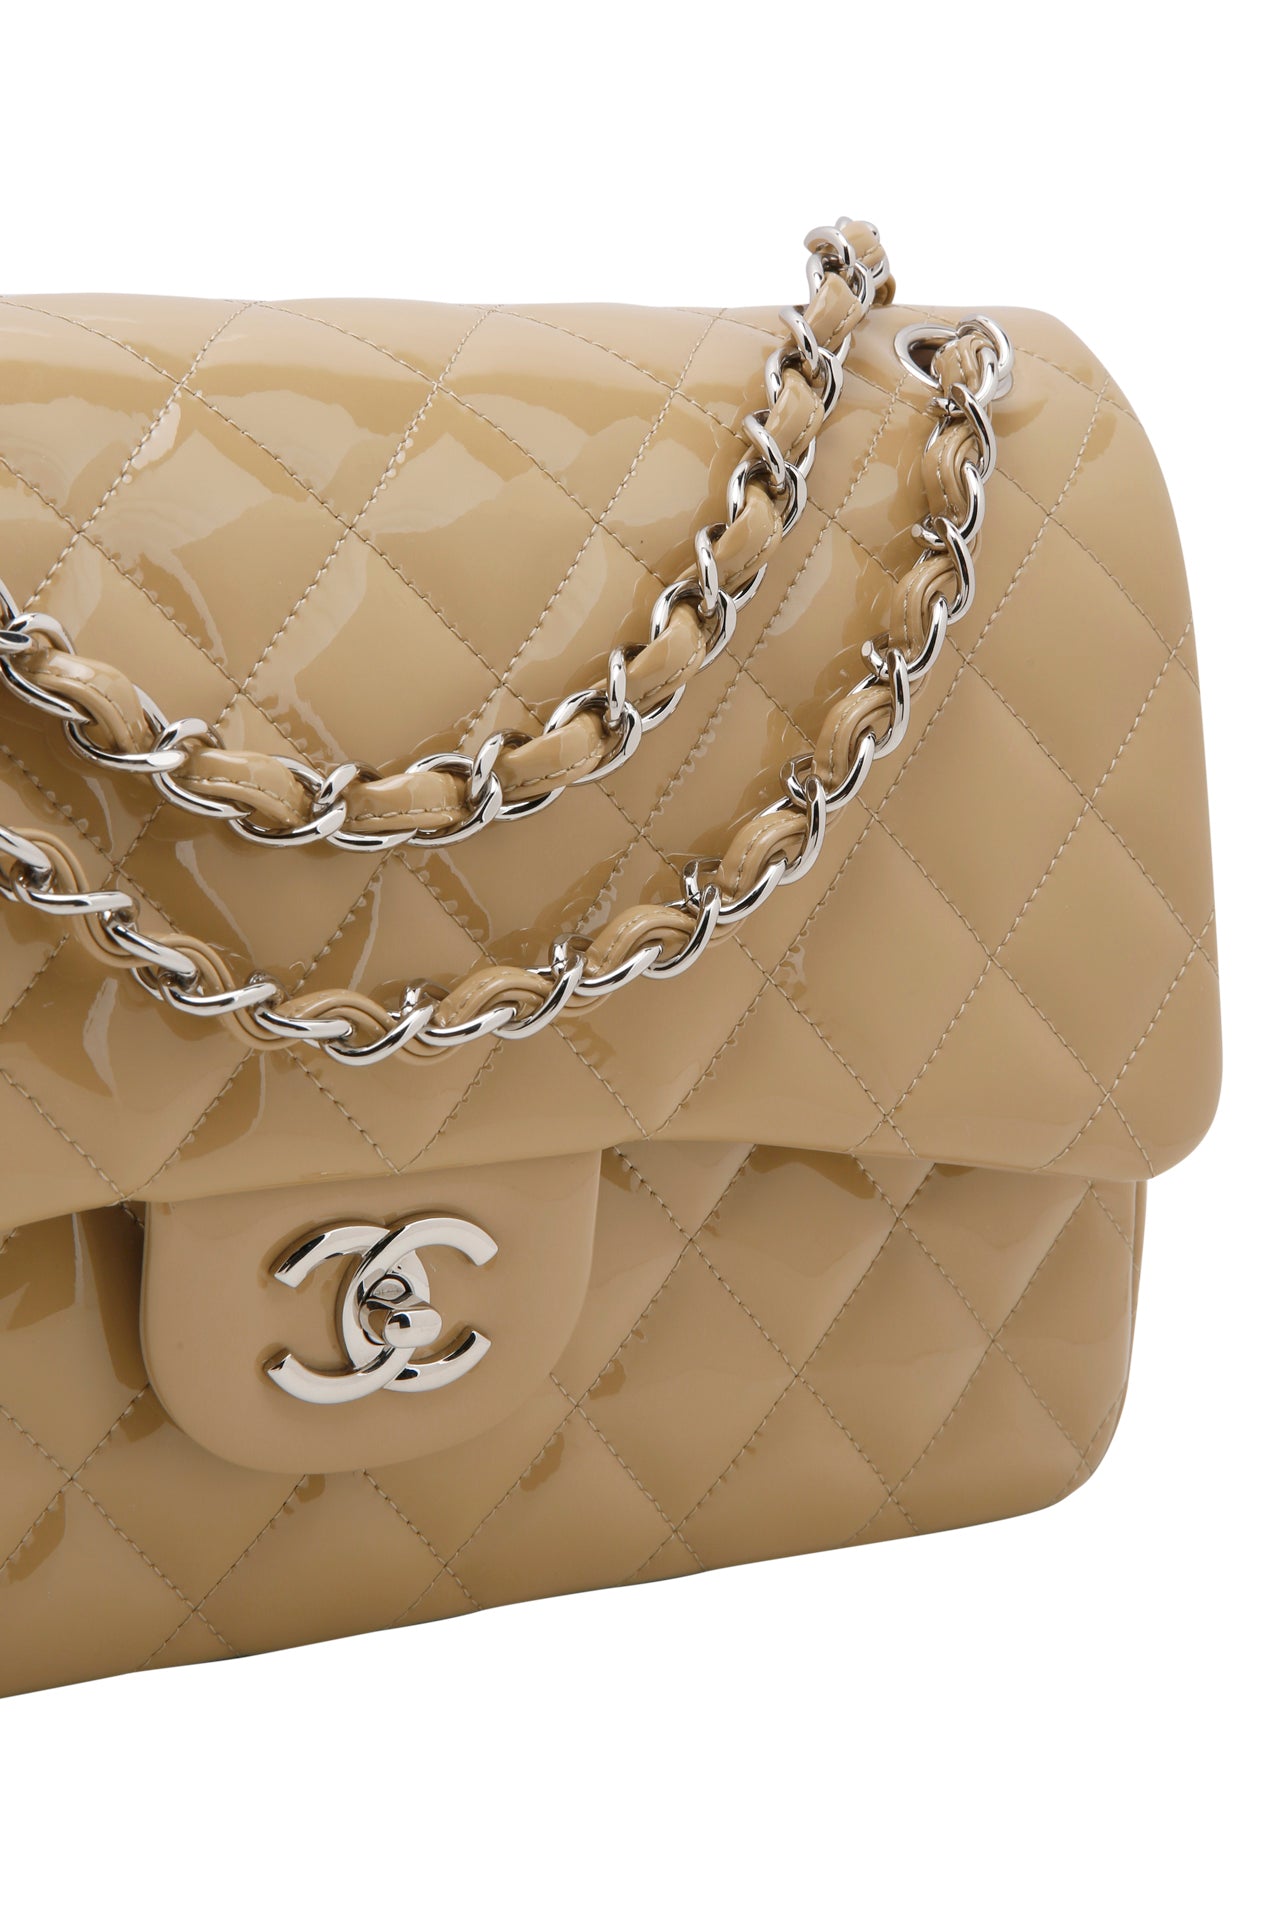 Chanel Jumbo Quilted Patent Leather Double Flap Beige